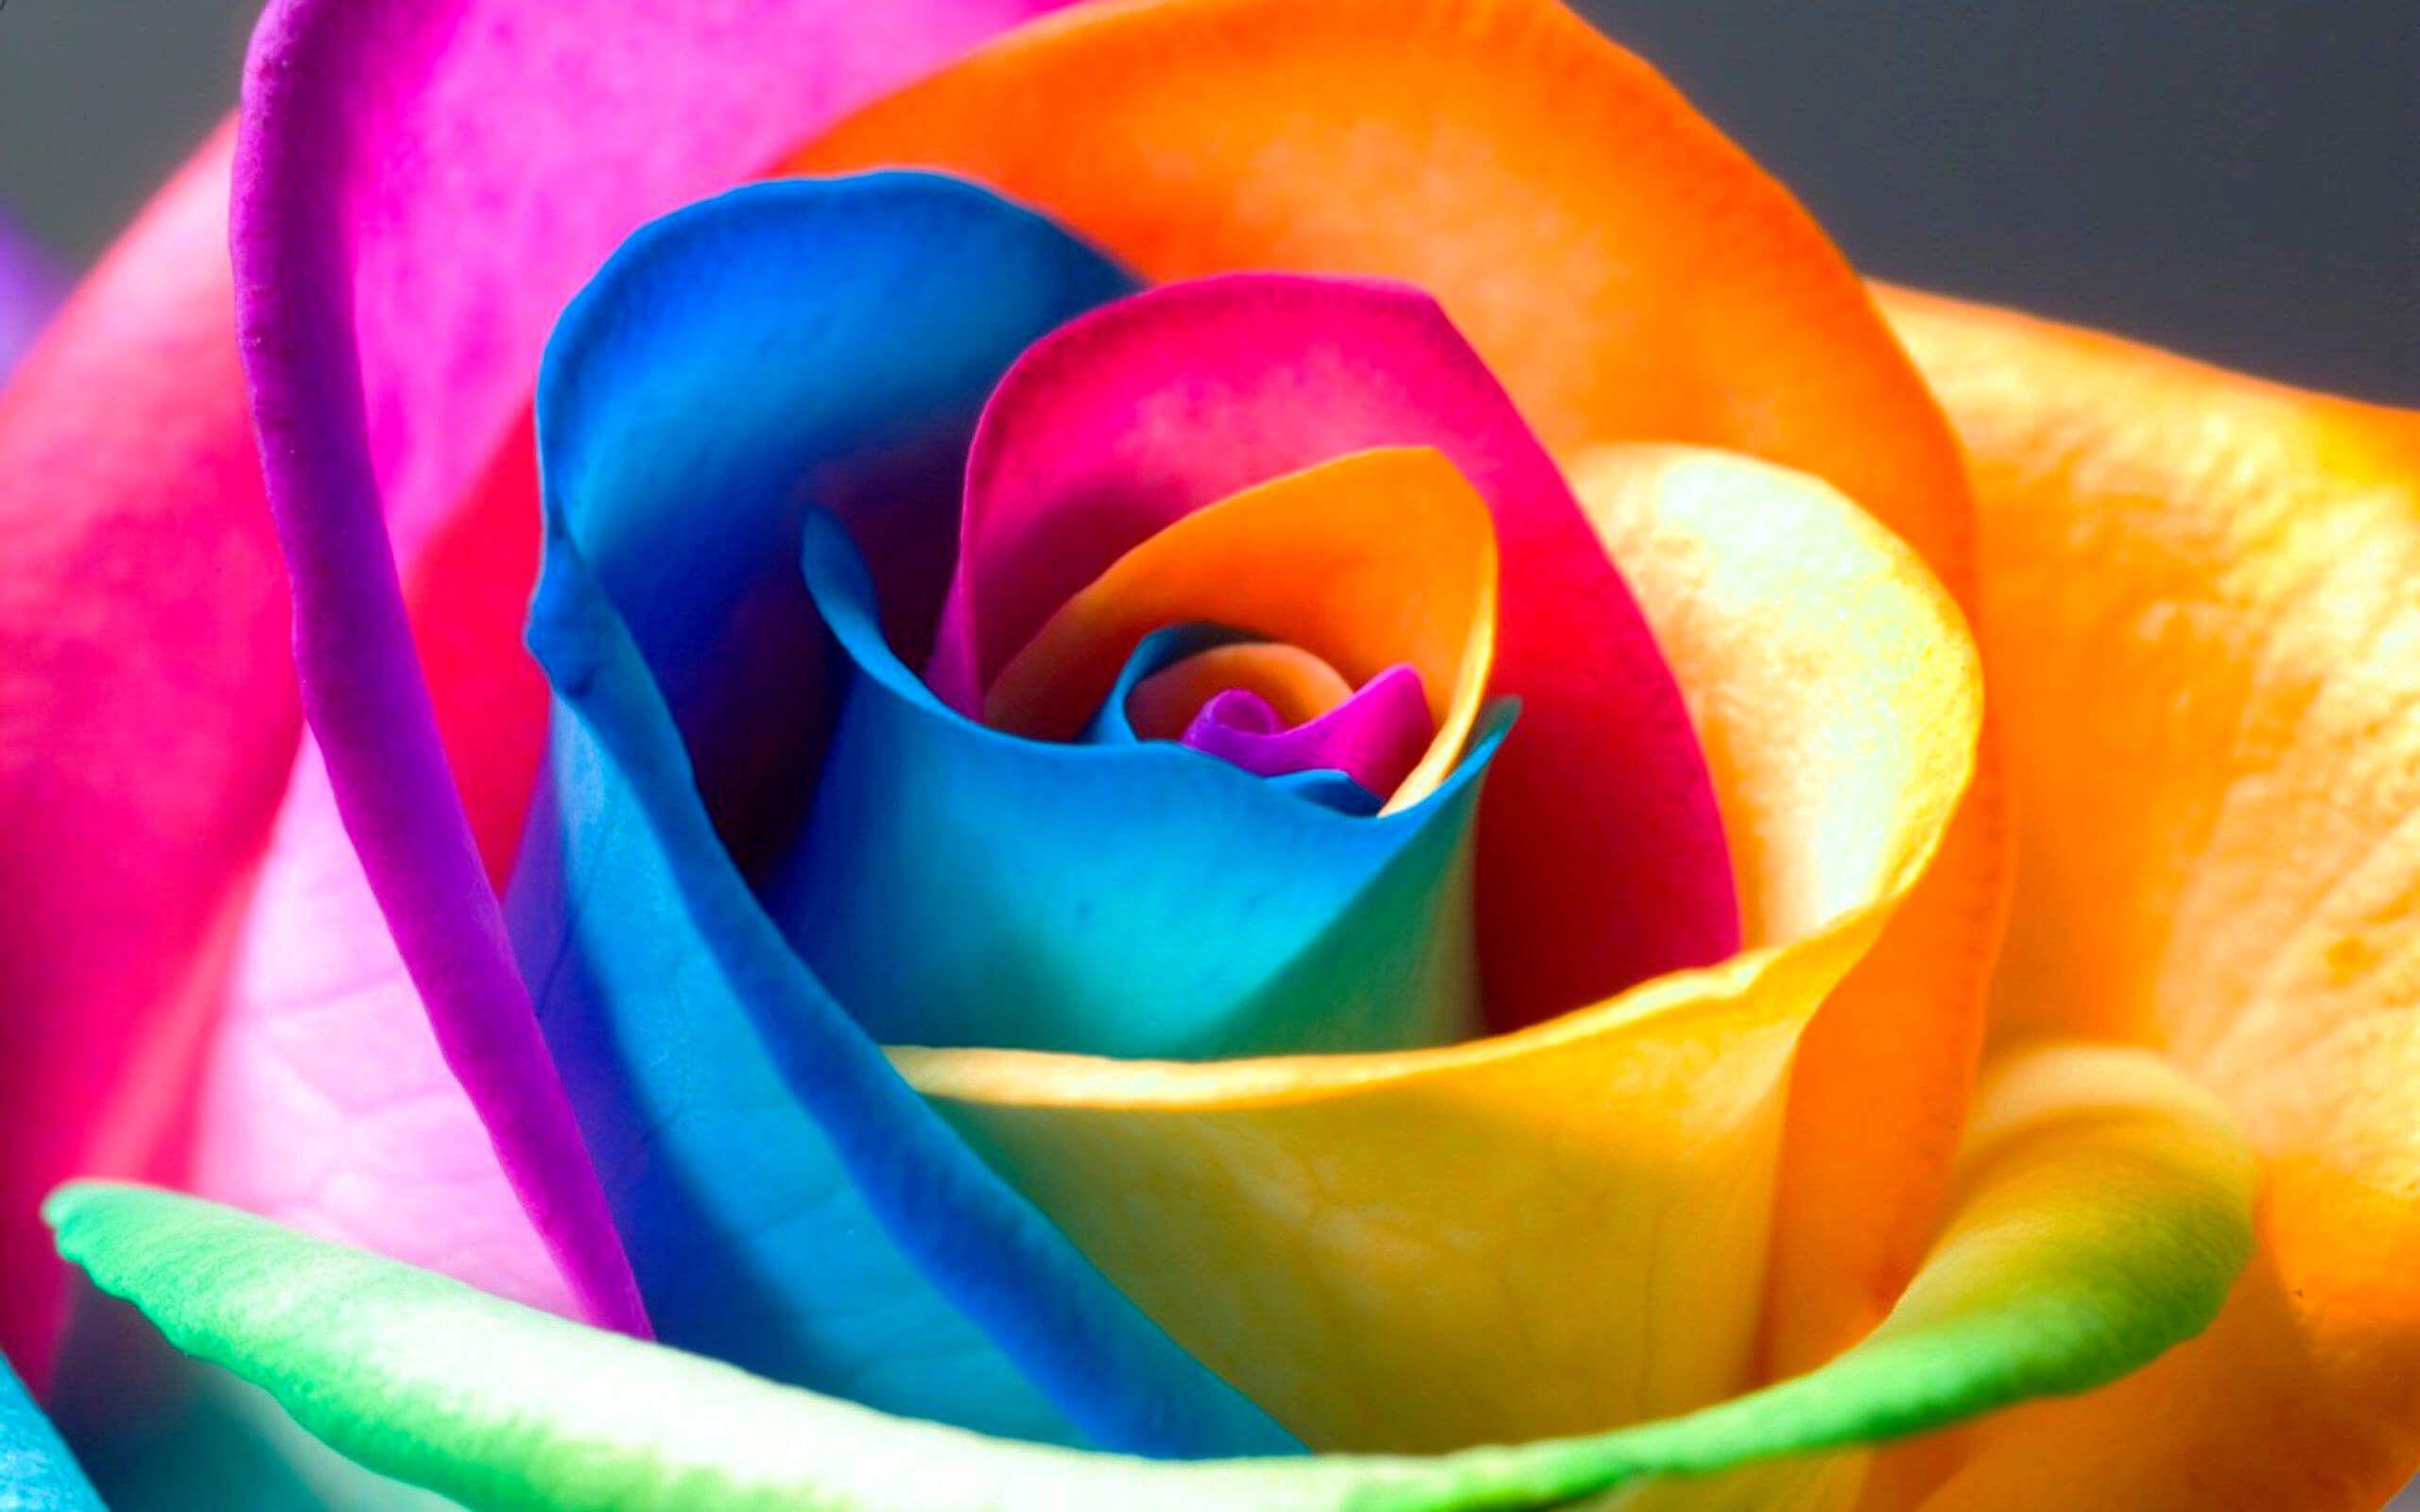 Colorful rose petals - Free High quality Flower wallpaper